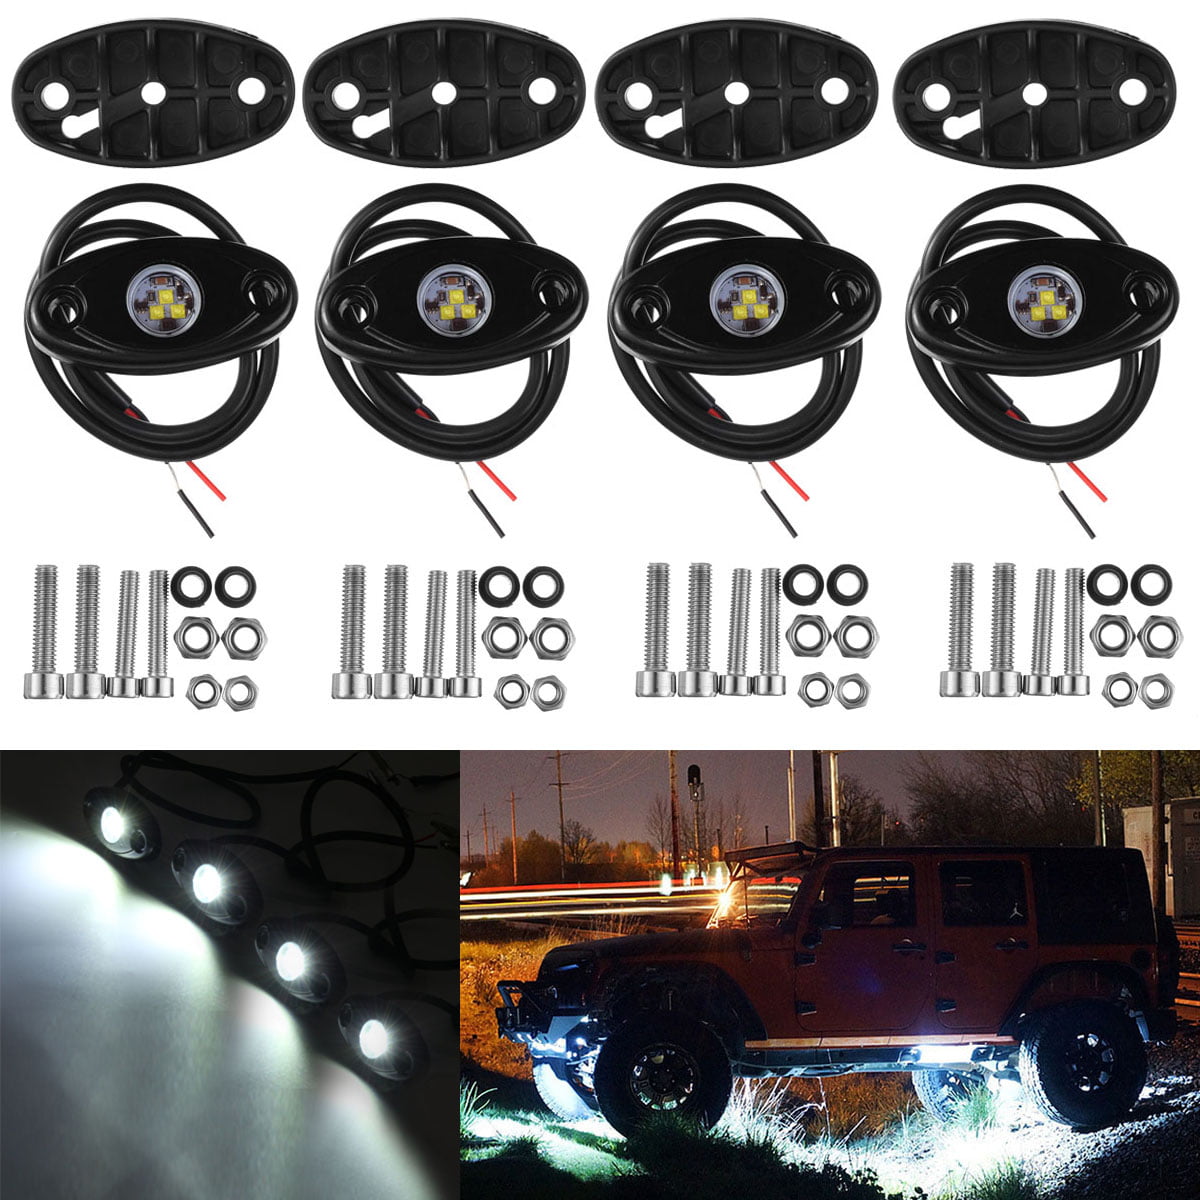 8X 9W 2inch Blue LED Rock Light Offroad Wrangle Truck Underbody Trail Rig Lights 